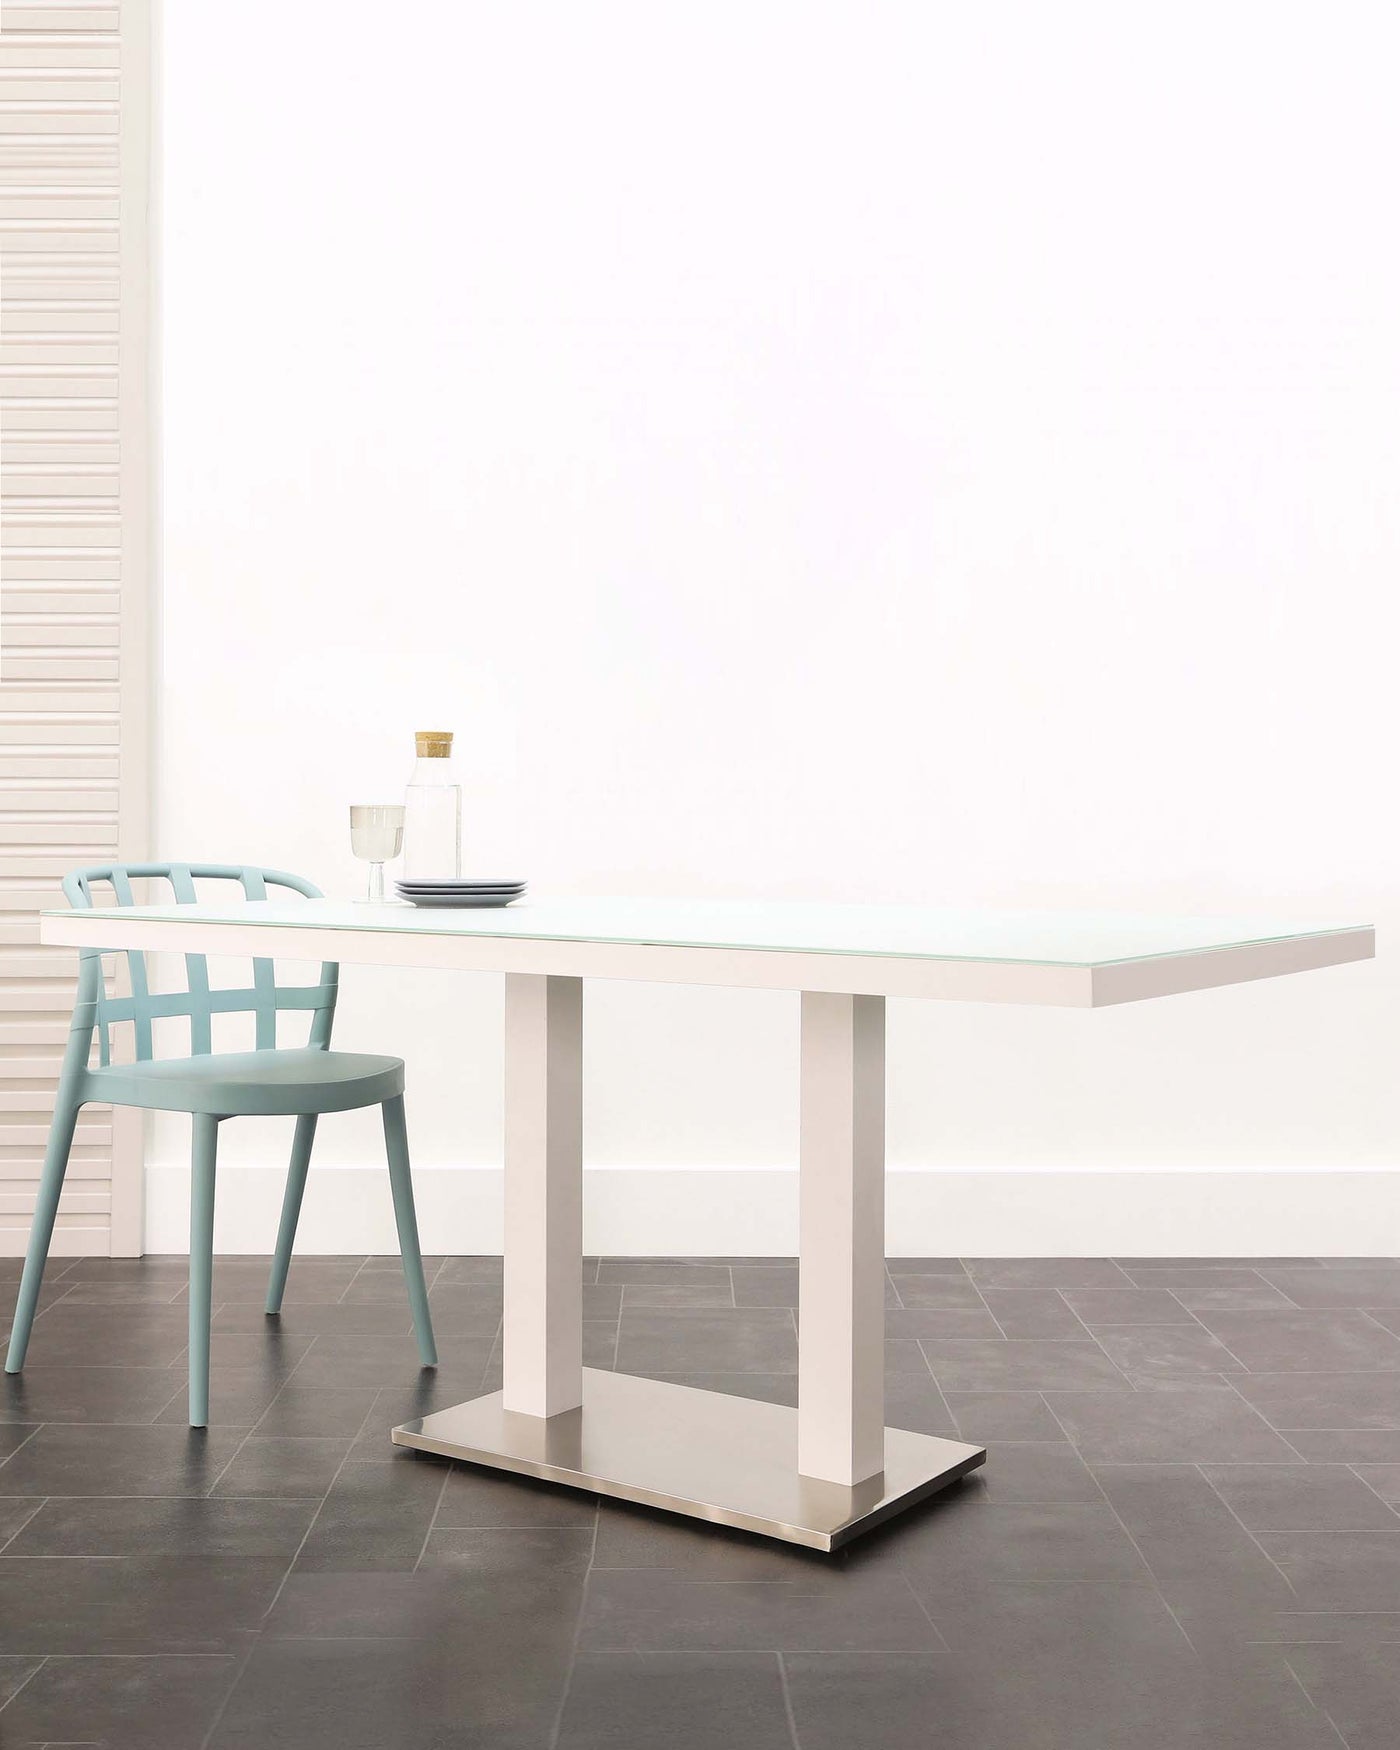 Modern minimalist furniture set featuring a white rectangular dining table with a sleek tabletop supported by two wide, flat legs connected at the base, paired with a single aqua blue chair with a curved backrest and slender legs. The set is displayed in a bright room with light walls and dark floor tiles, accented by a simple decorative bottle and glass placed on the table.